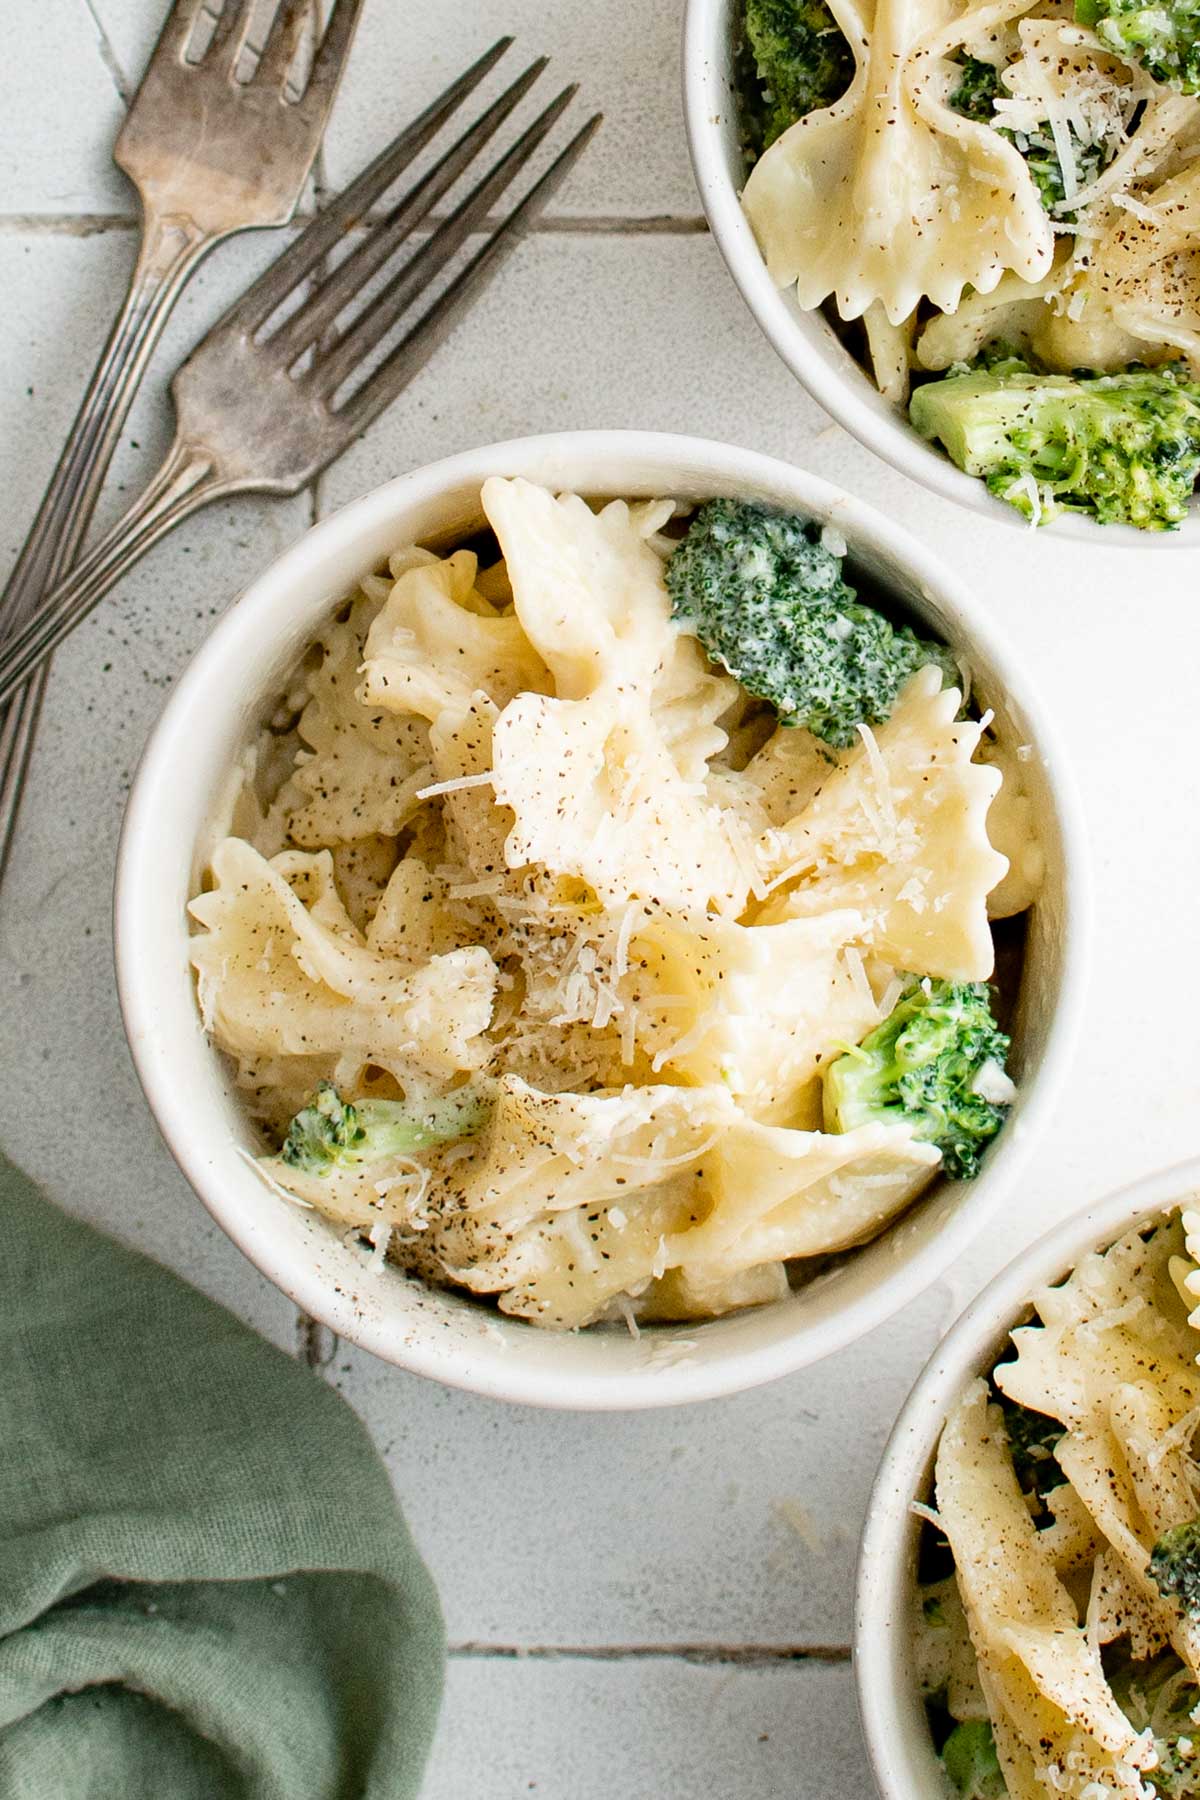 Bowl of broccoli pasta with 2 forks.